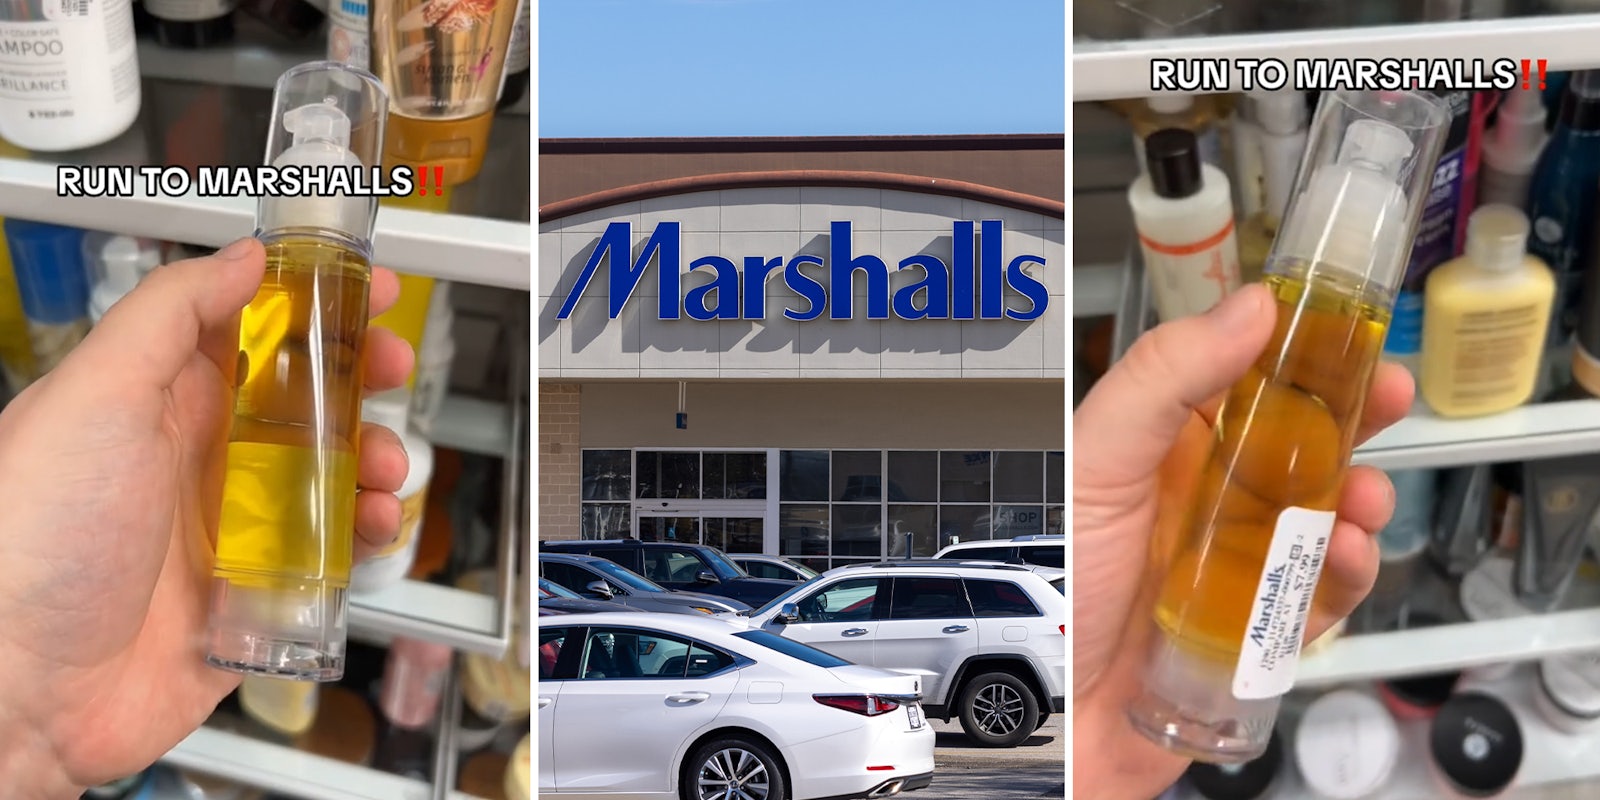 Woman finds unlabeled ‘mystery liquid’ being sold at Marshalls